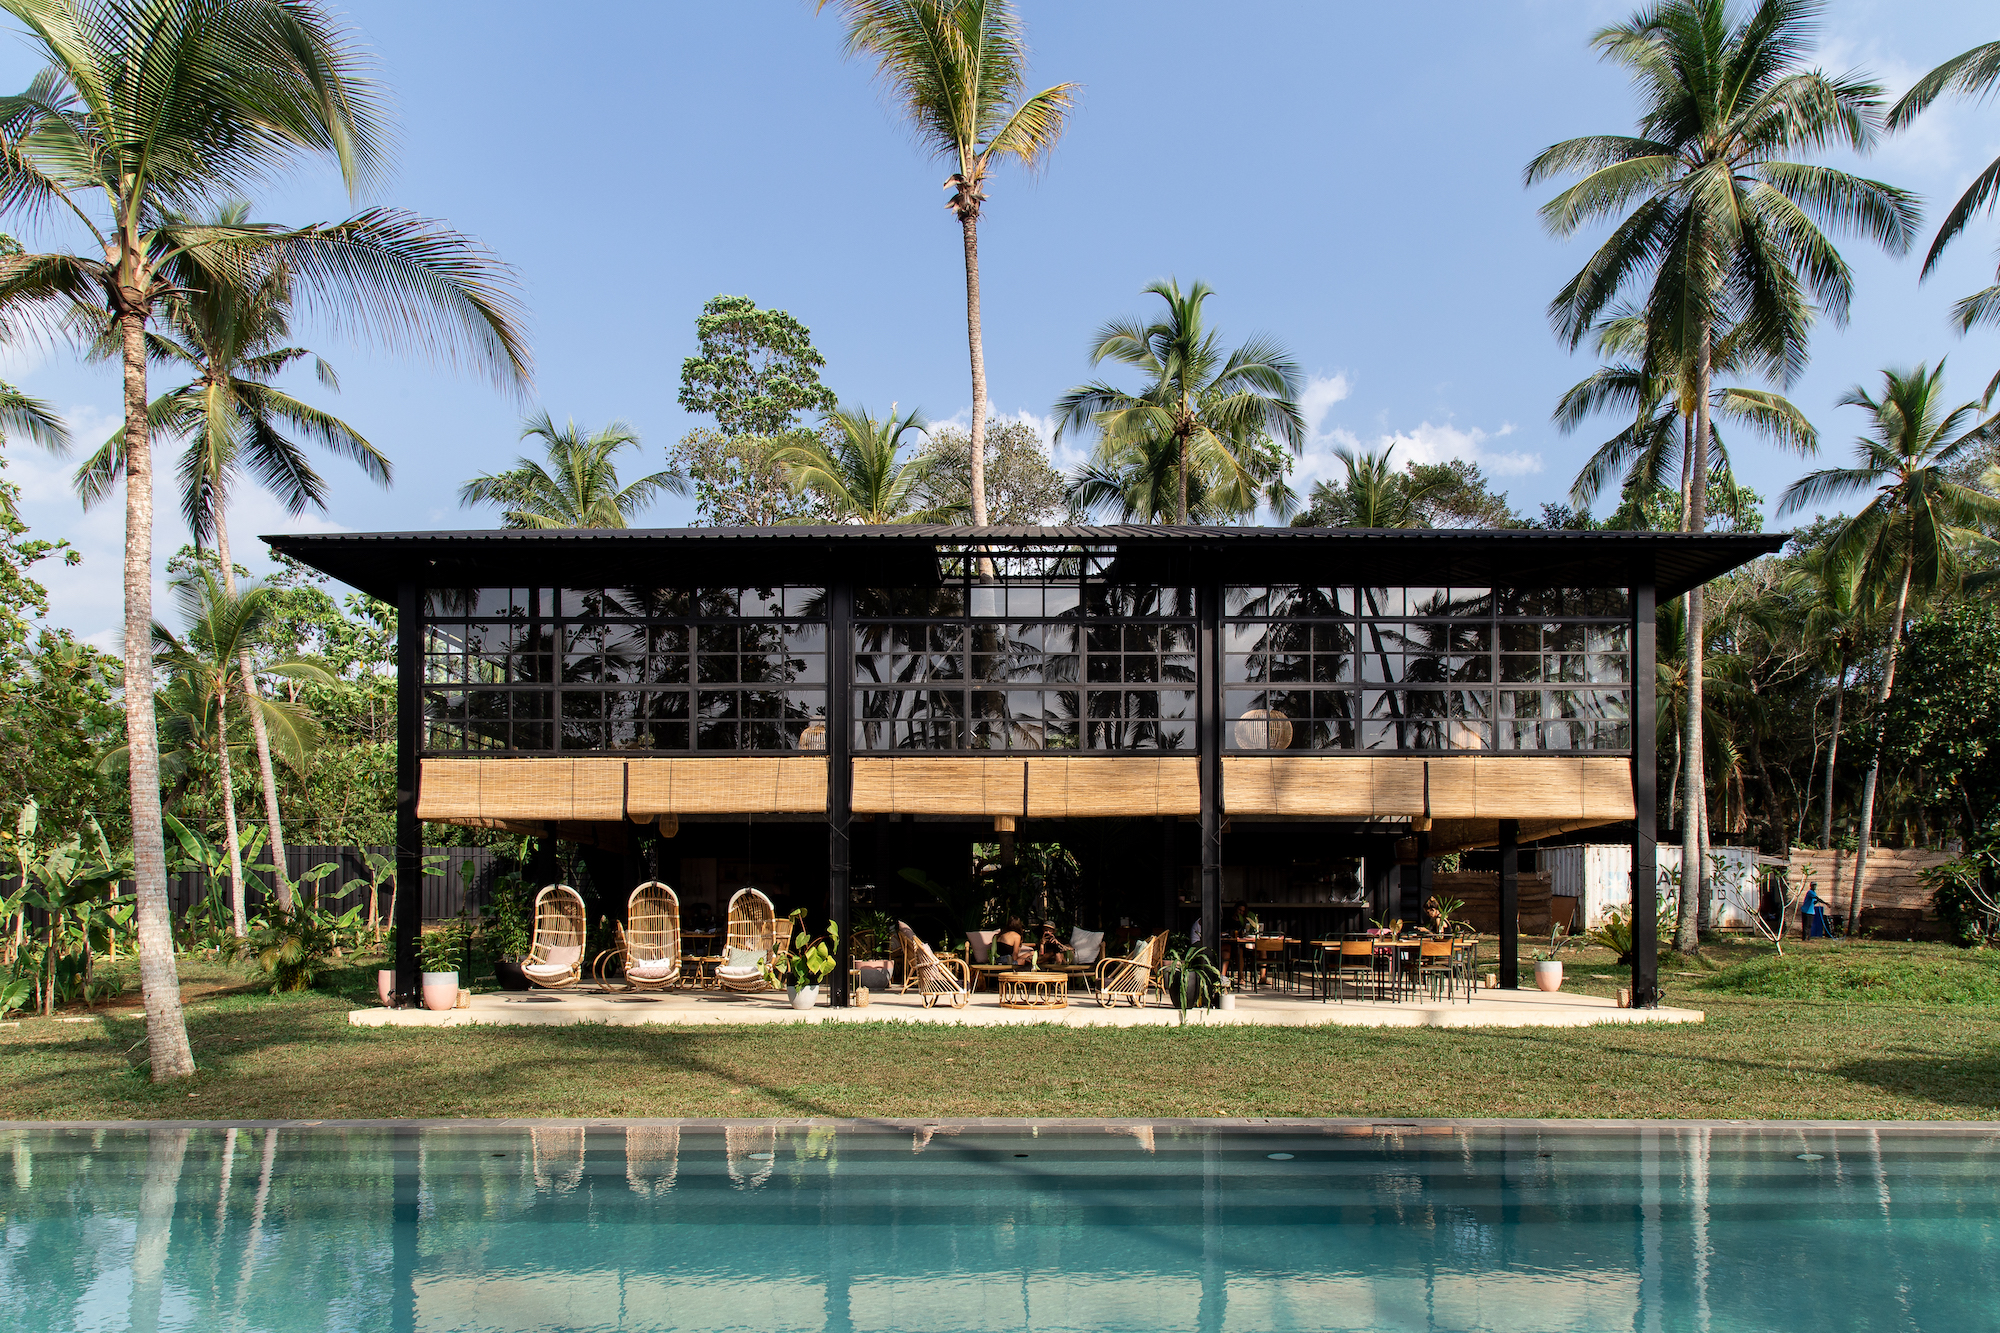 Dramatic Design Leads The Way At This Sri Lankan Hotel